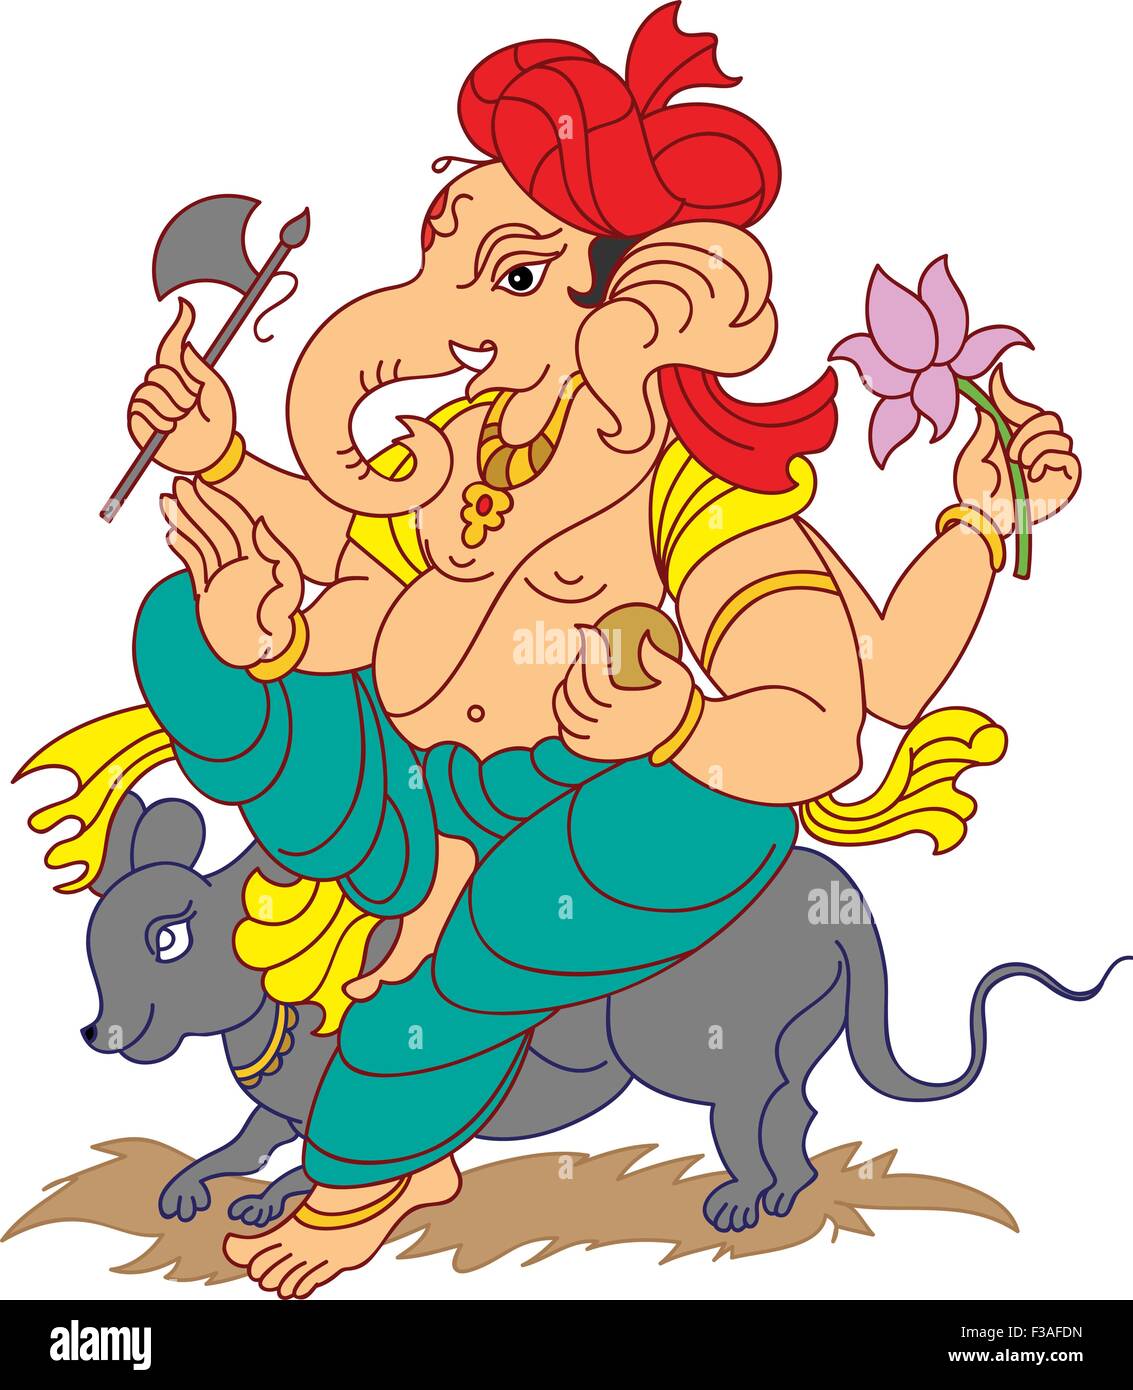 Ganpati art Cut Out Stock Images & Pictures - Page 3 - Alamy